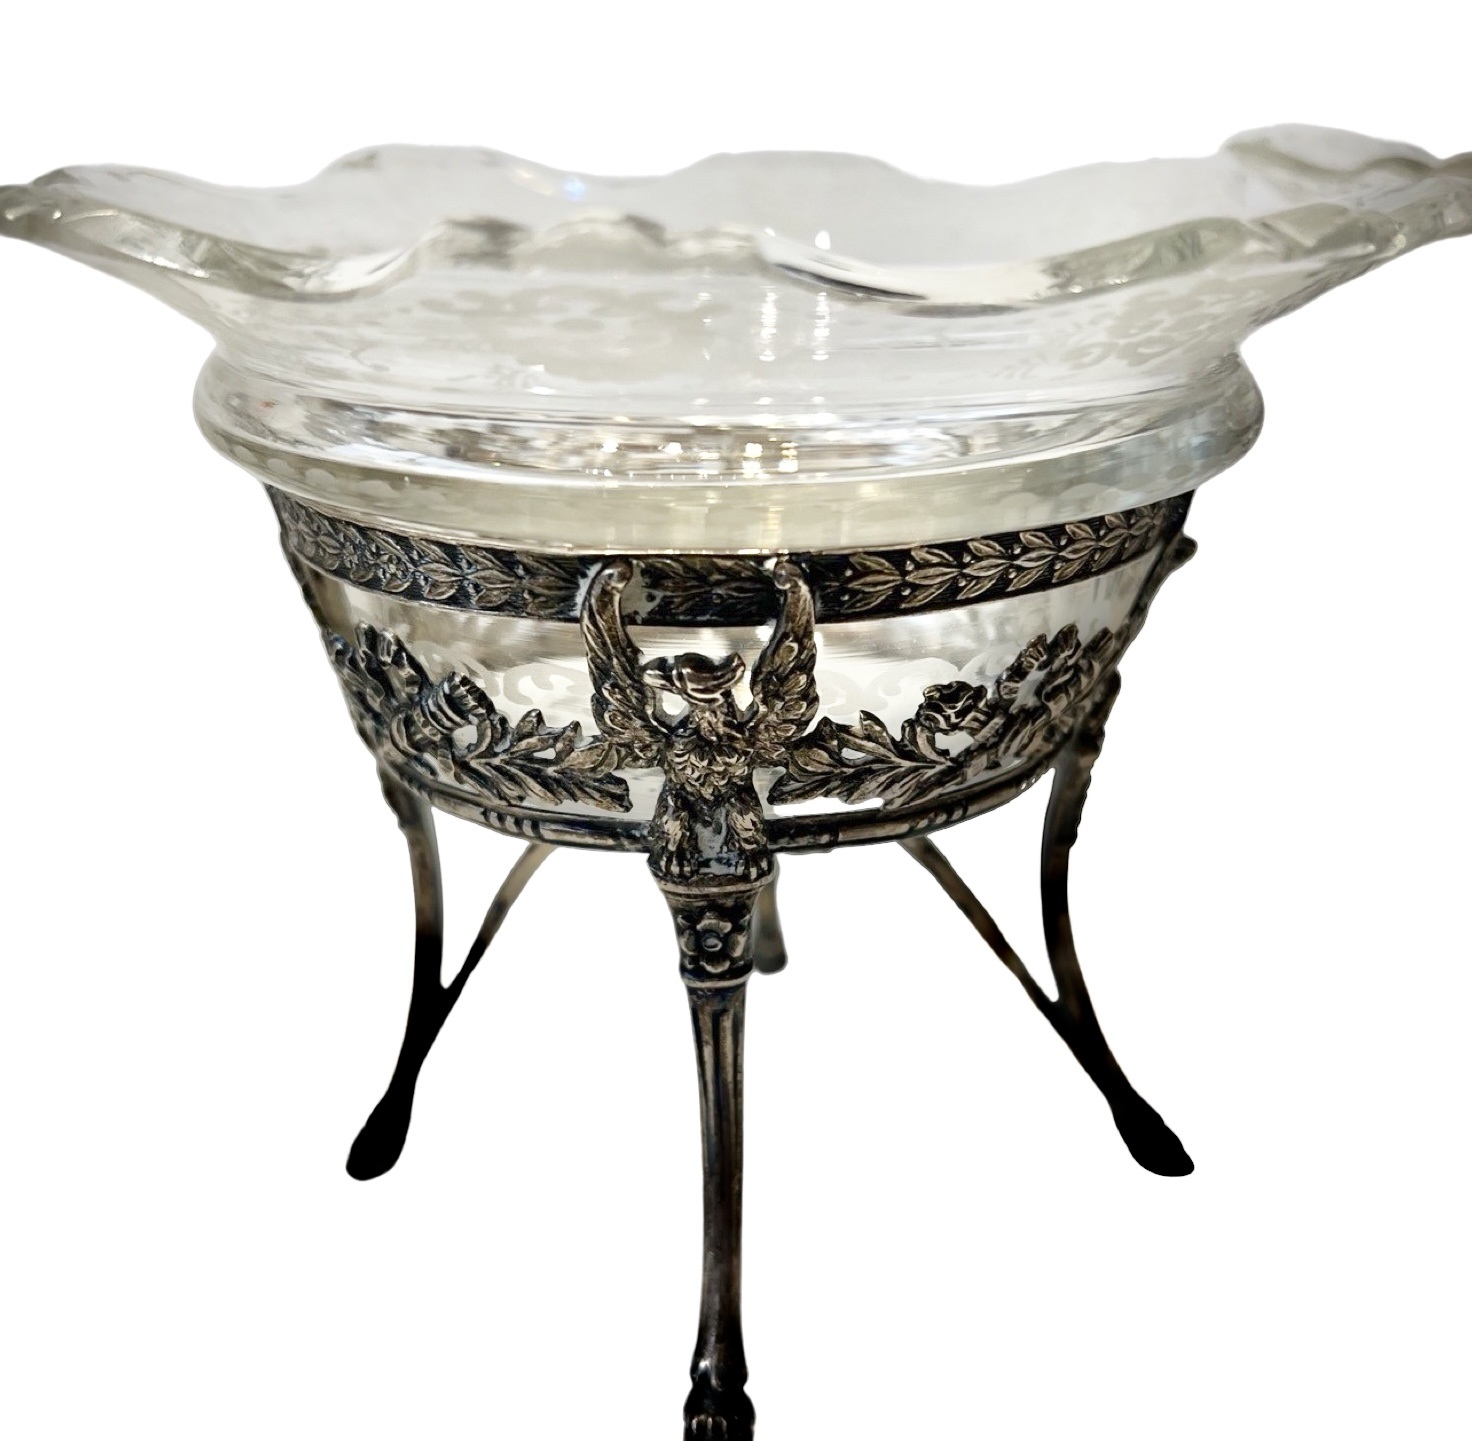 A SET OF FOUR SILVER AND CUT GLASS SWEETMEAT BASKETS, POSSIBLY GERMAN, C. 1860 - Image 3 of 4